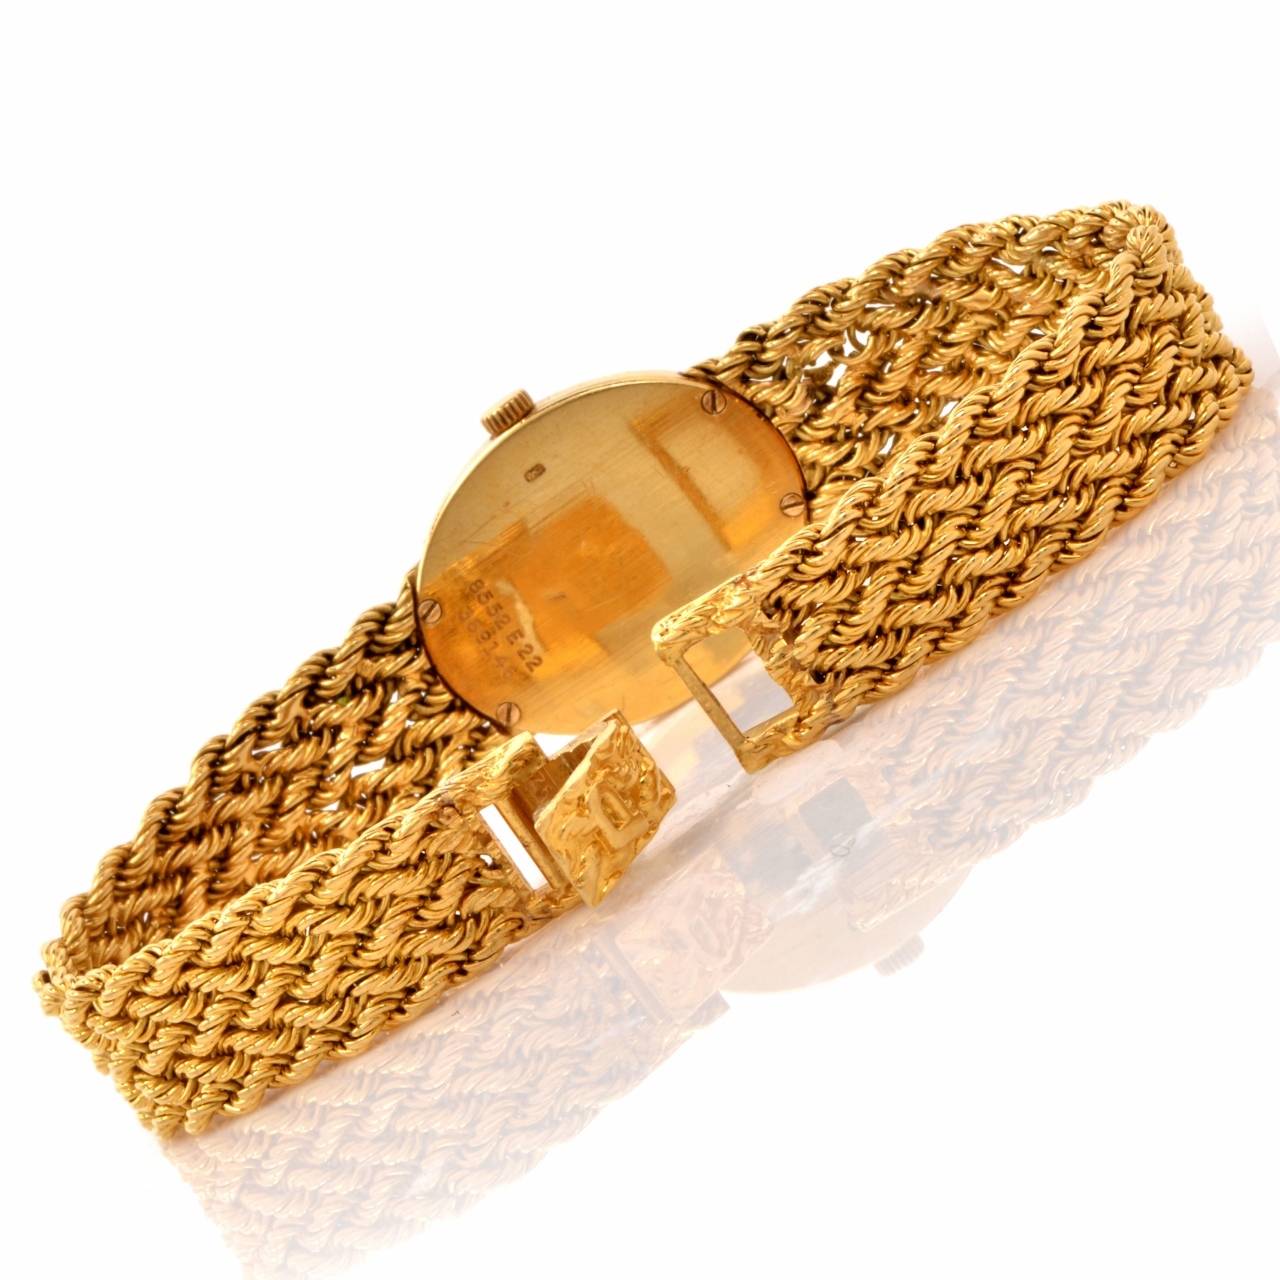 This authentic ladies' vintage ca 1970's  Piaget wristwatch of unsurpassed refinement and aesthetic beauty   is crafted in solid 18K yellow gold and features  an ovular yellow gold case embellished with a twisted rope design border, matching the